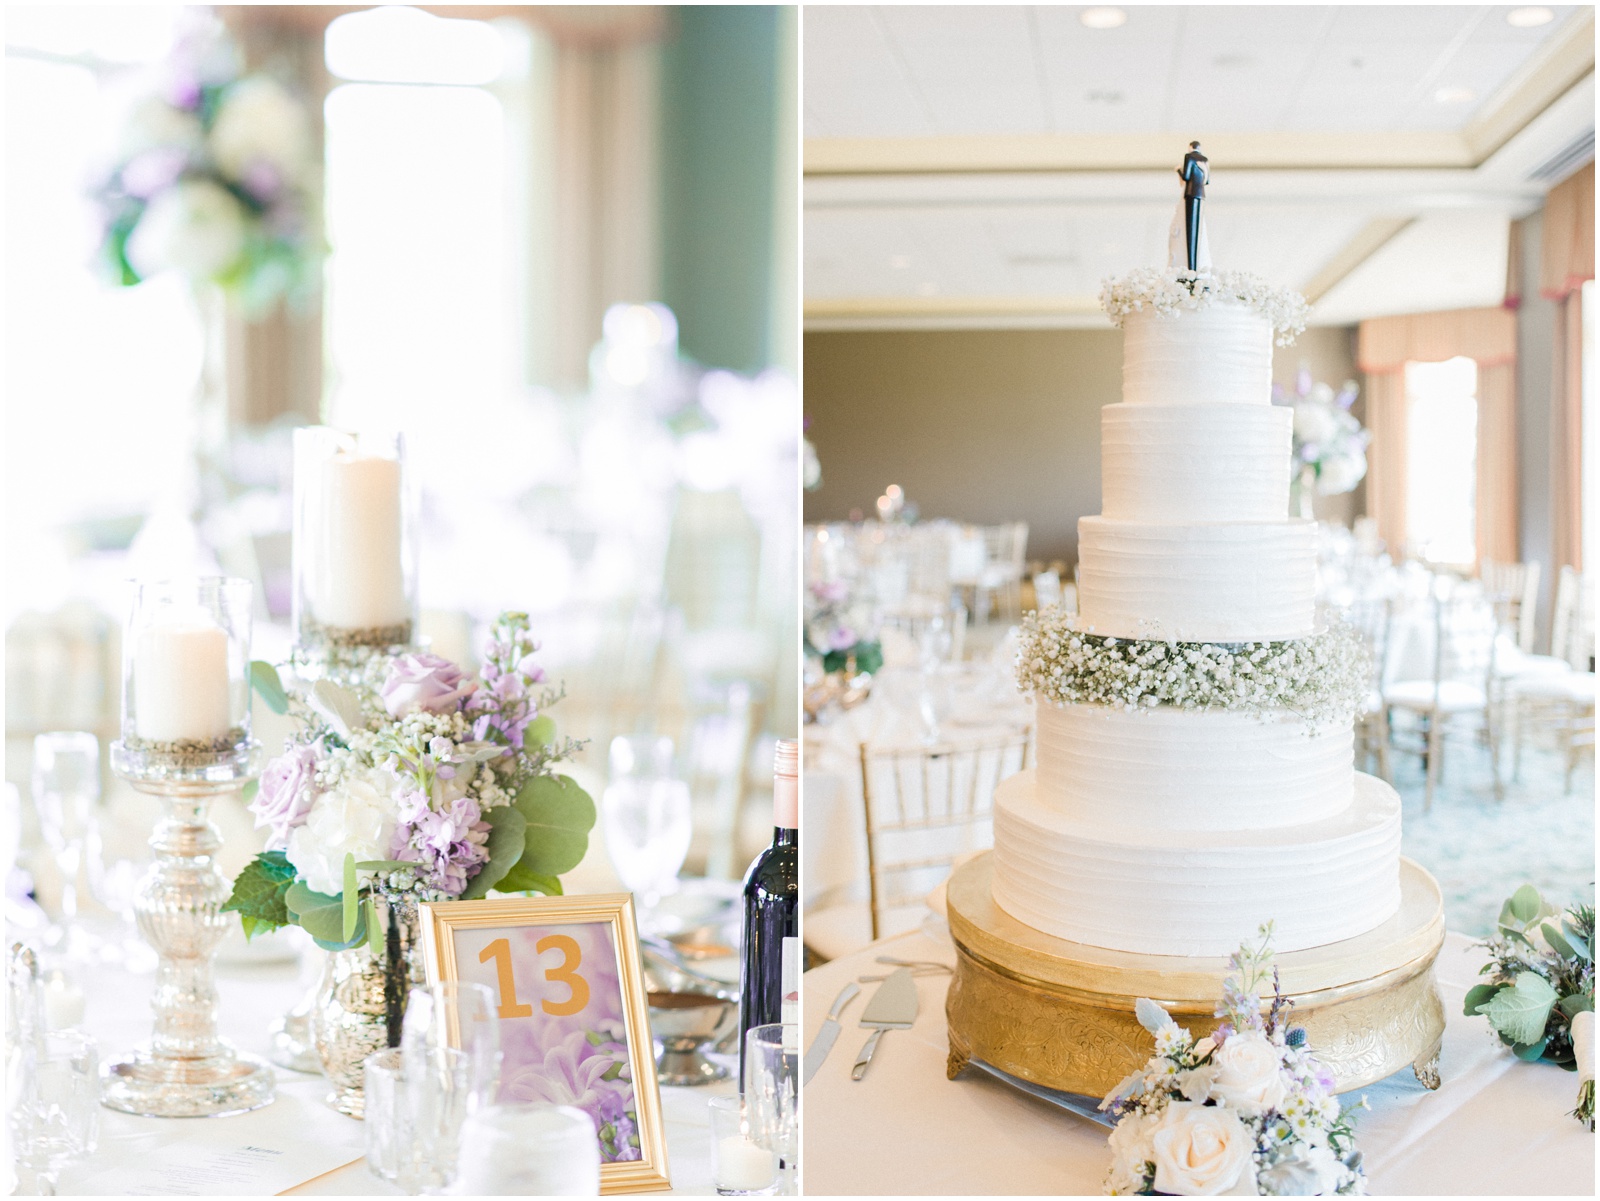 white wedding cake with lavender floral centerpieces